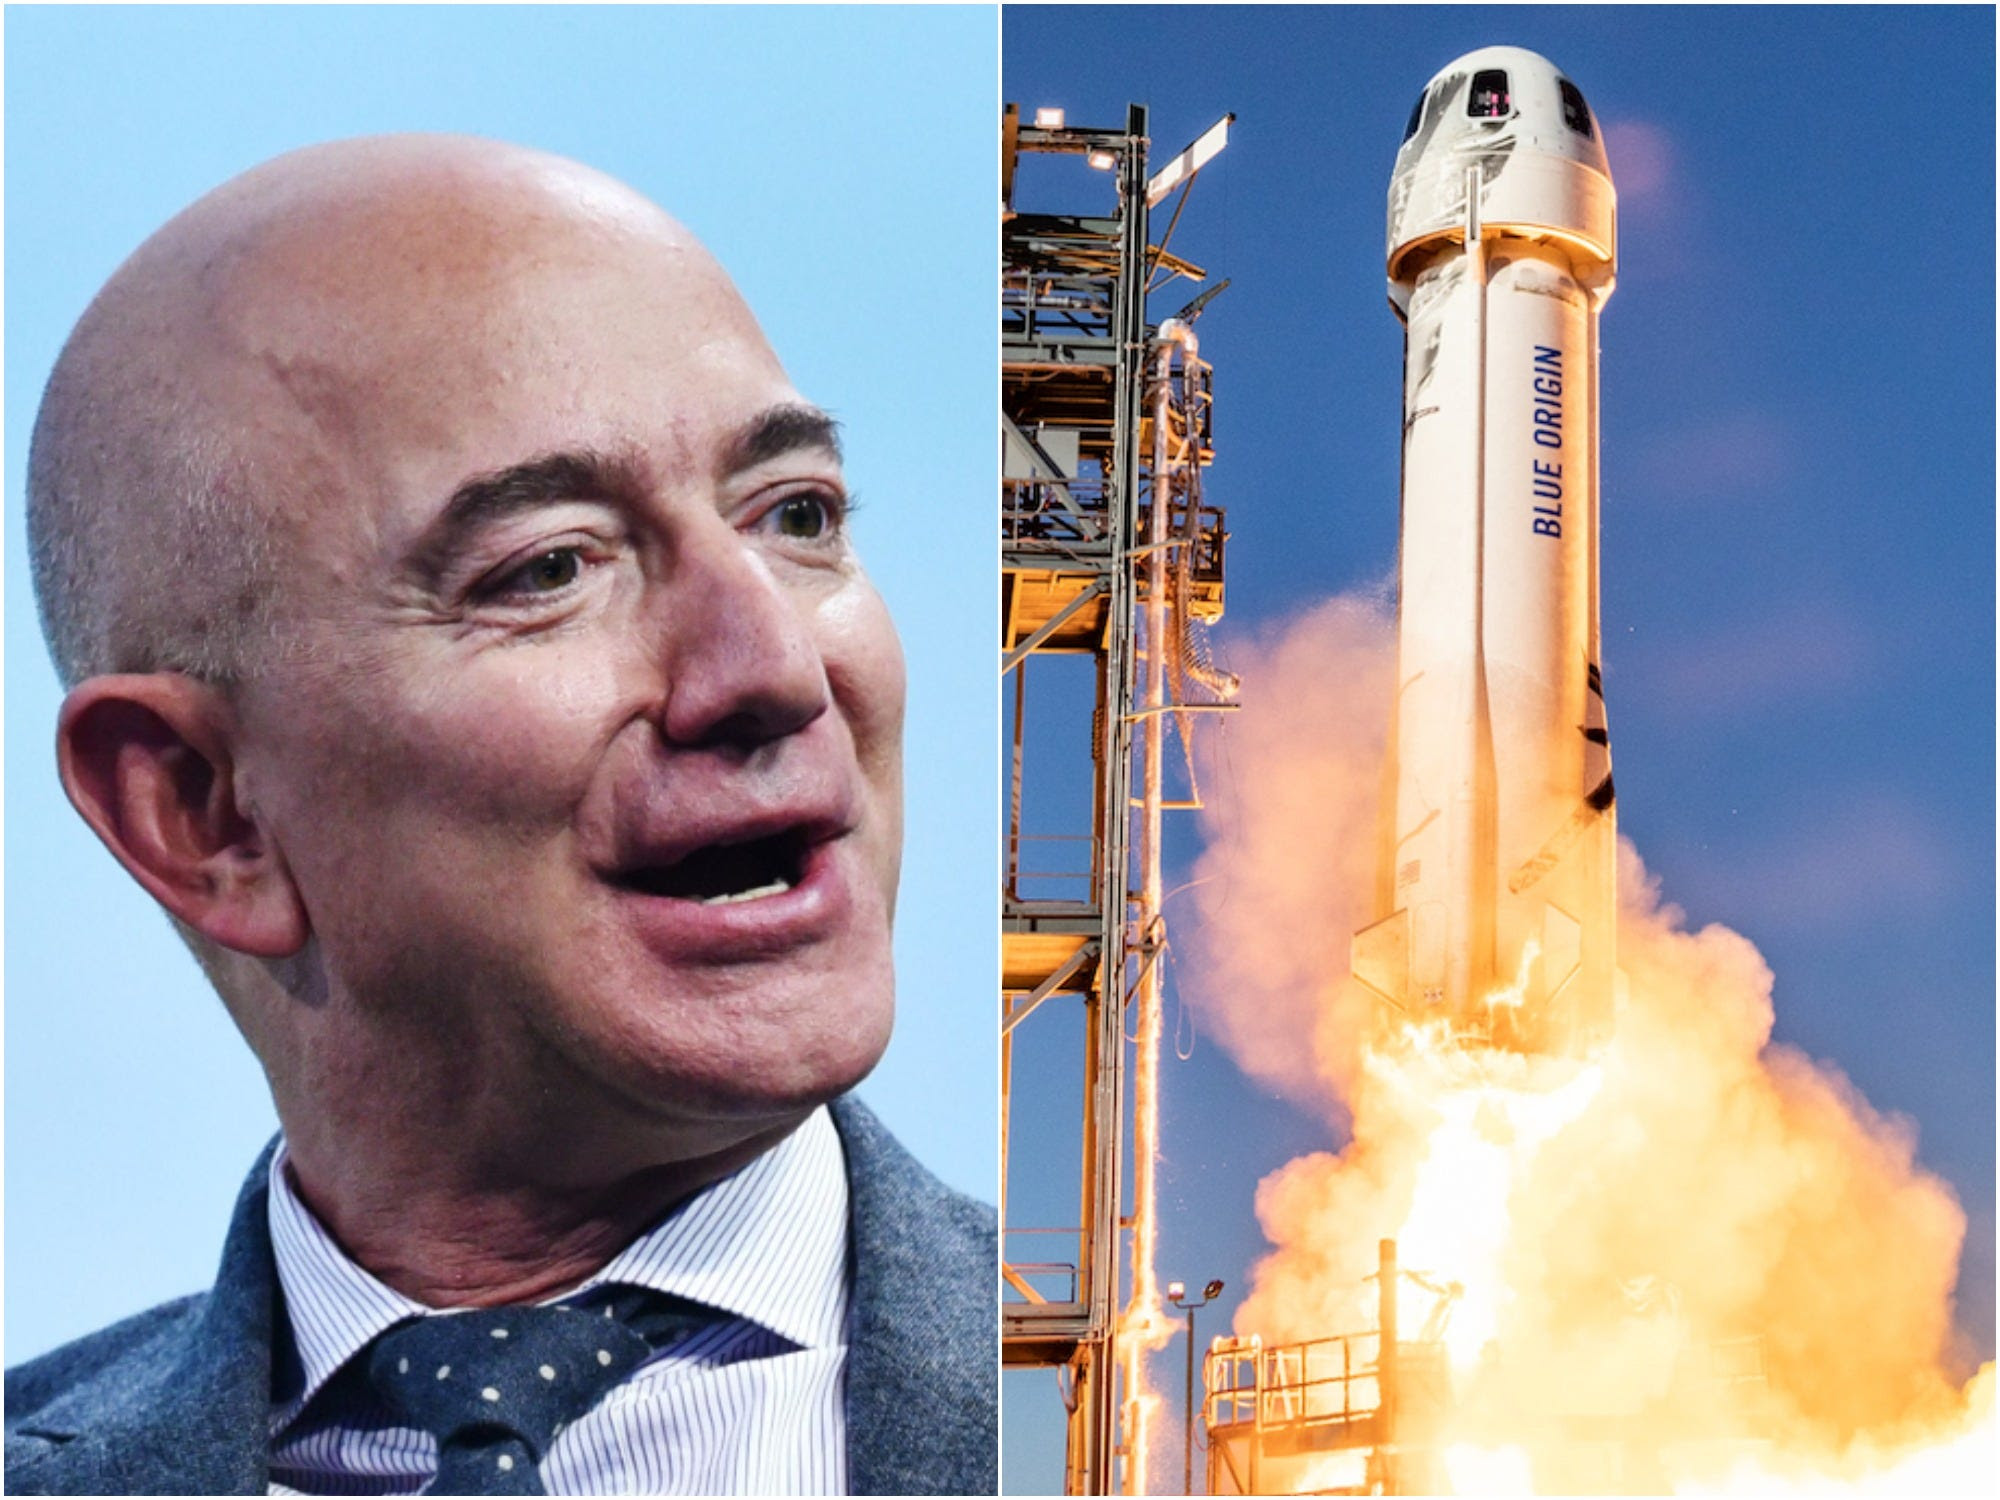 More than 56,000 people don't want Jeff Bezos to return from space next month